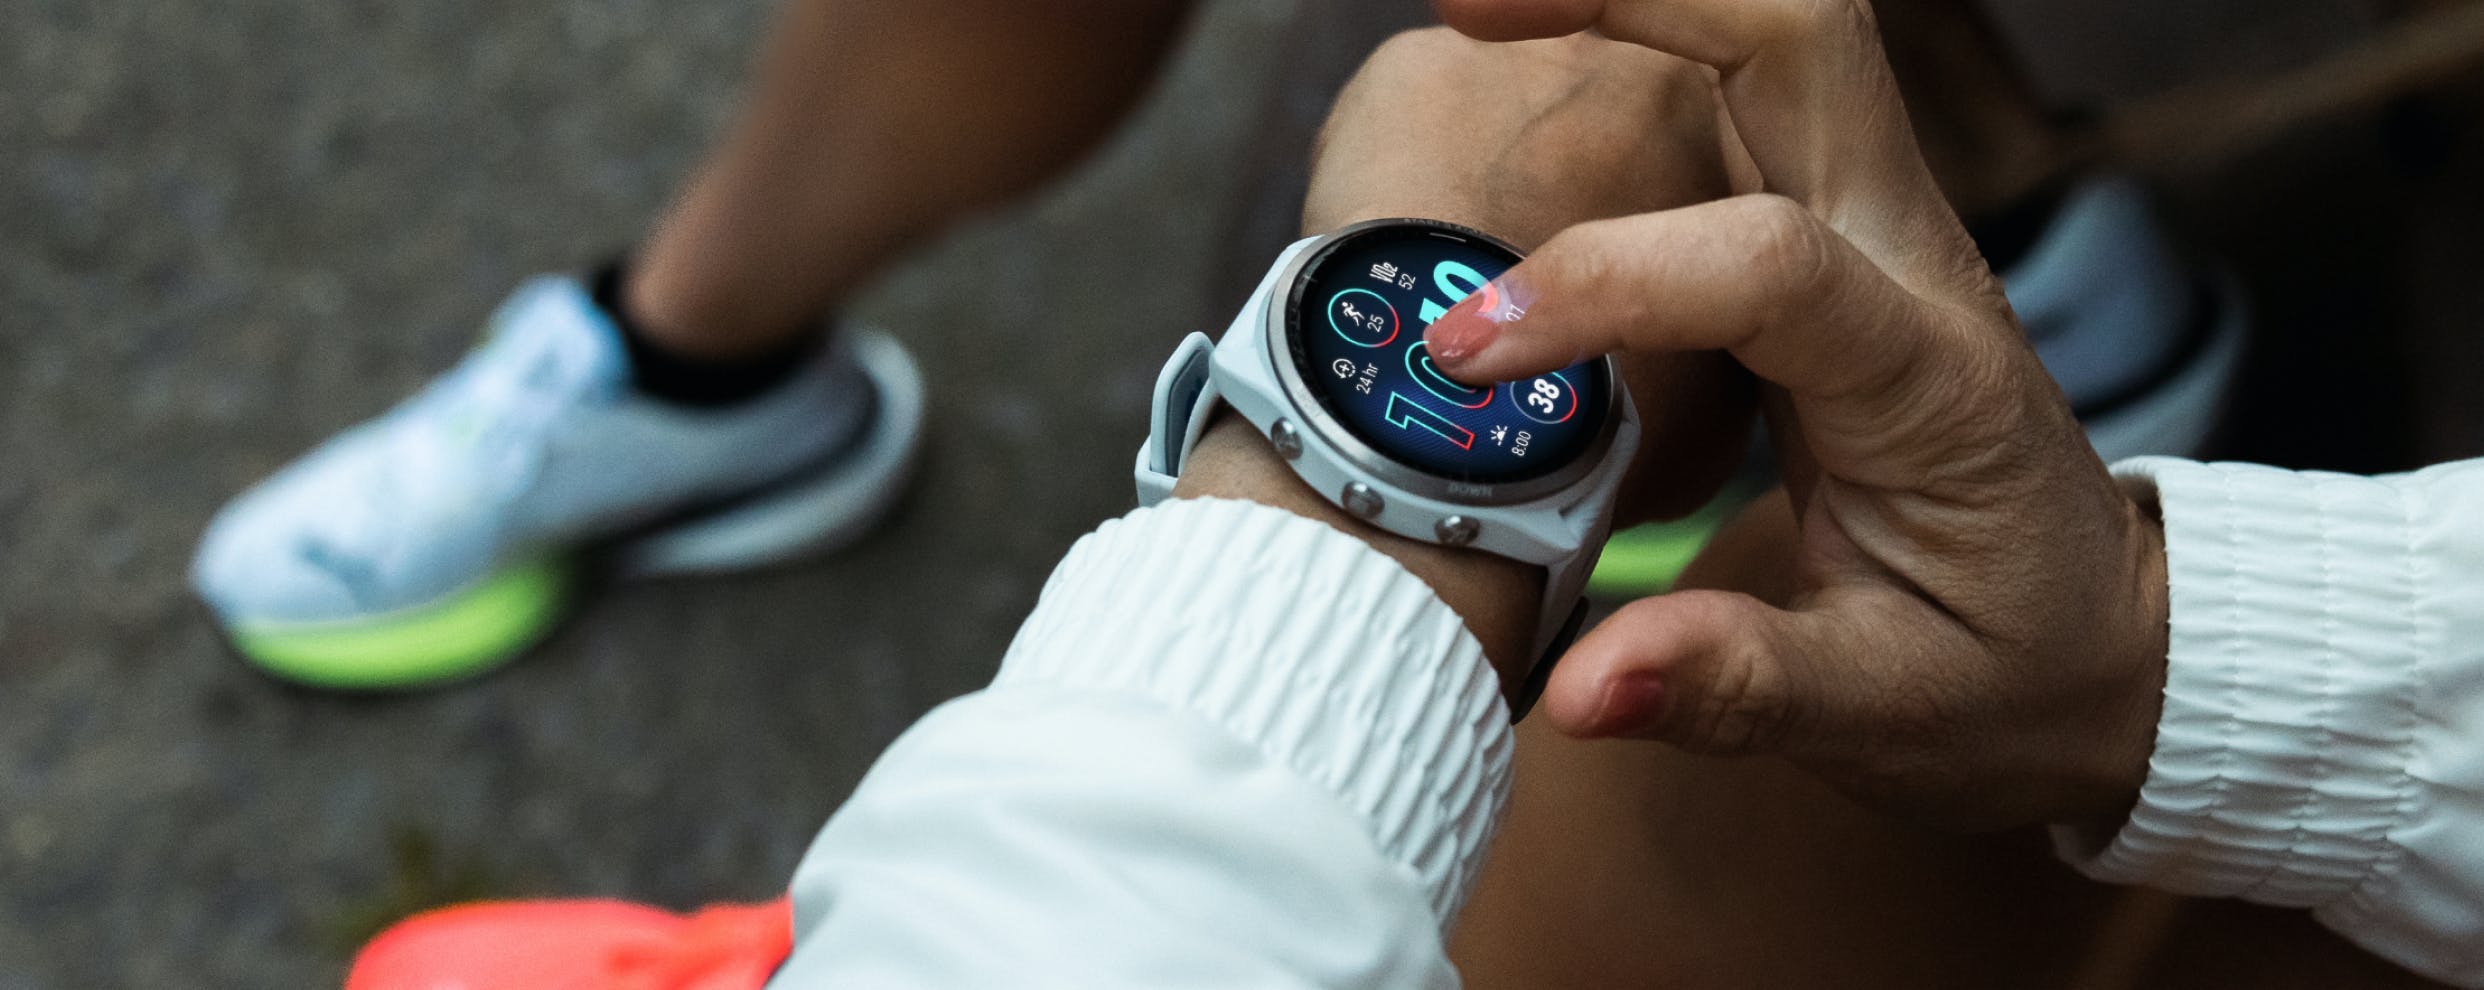 Meet Garmin’s newest and brightest smartwatch for treks, hikes and bikes, with AMOLED touchscreens and 30+ activity profiles.